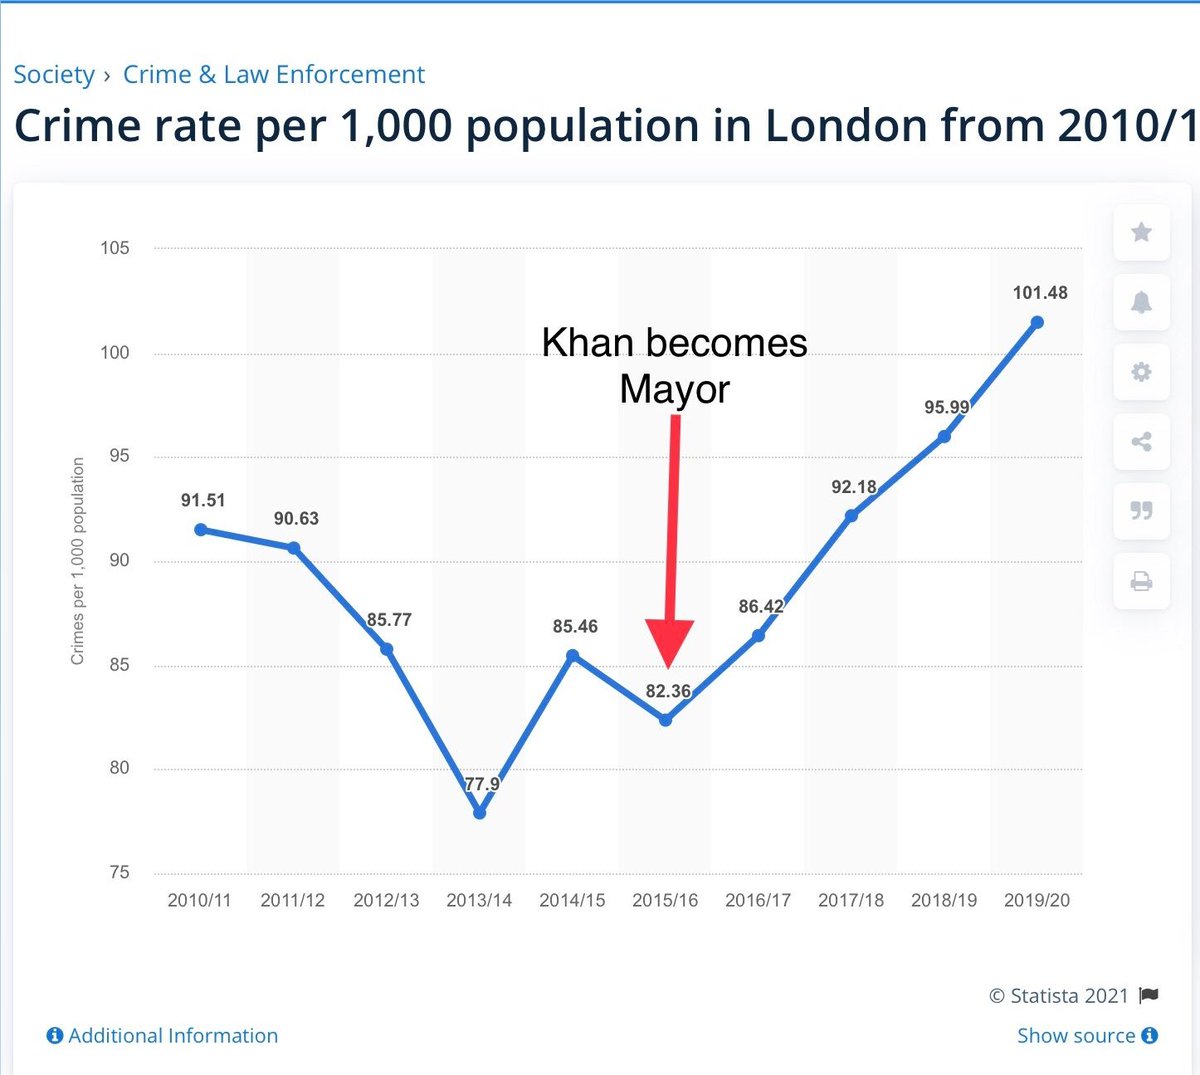 @thelewiswarner @SadiqKhan What about knife crime?